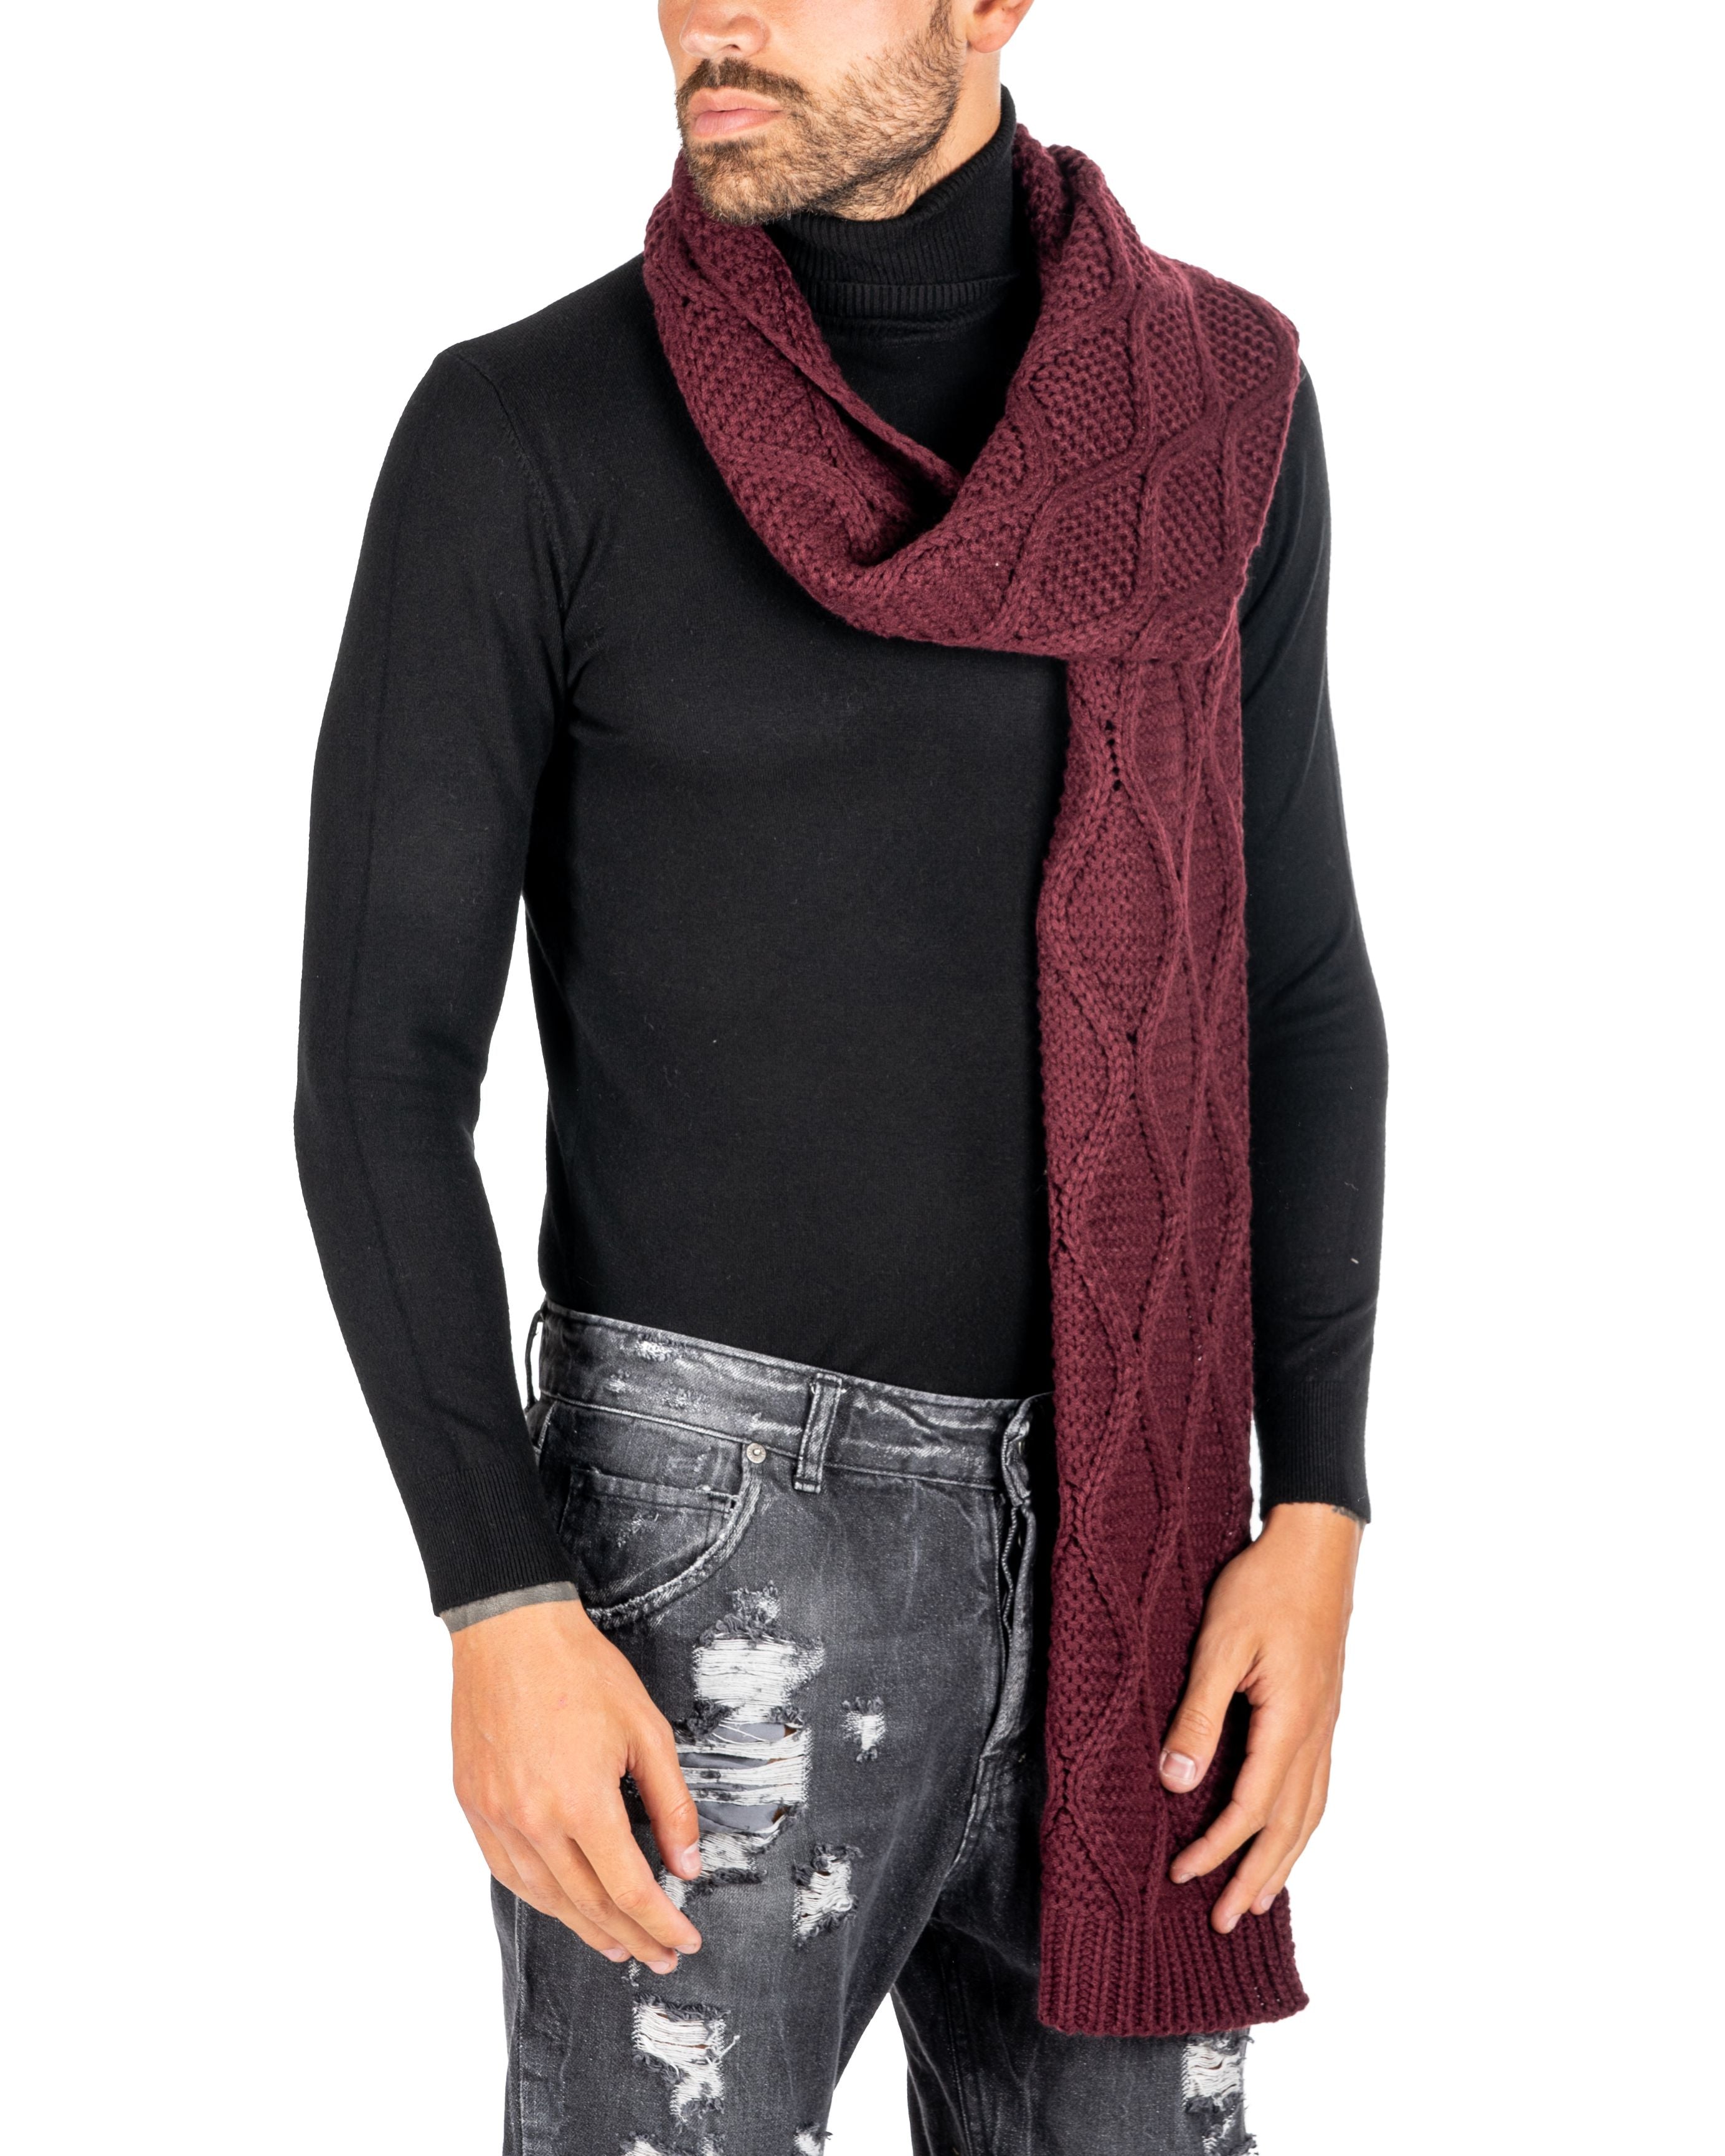 HEAVY SCARF BORDEAUX WITH BRAIDS PATTERN